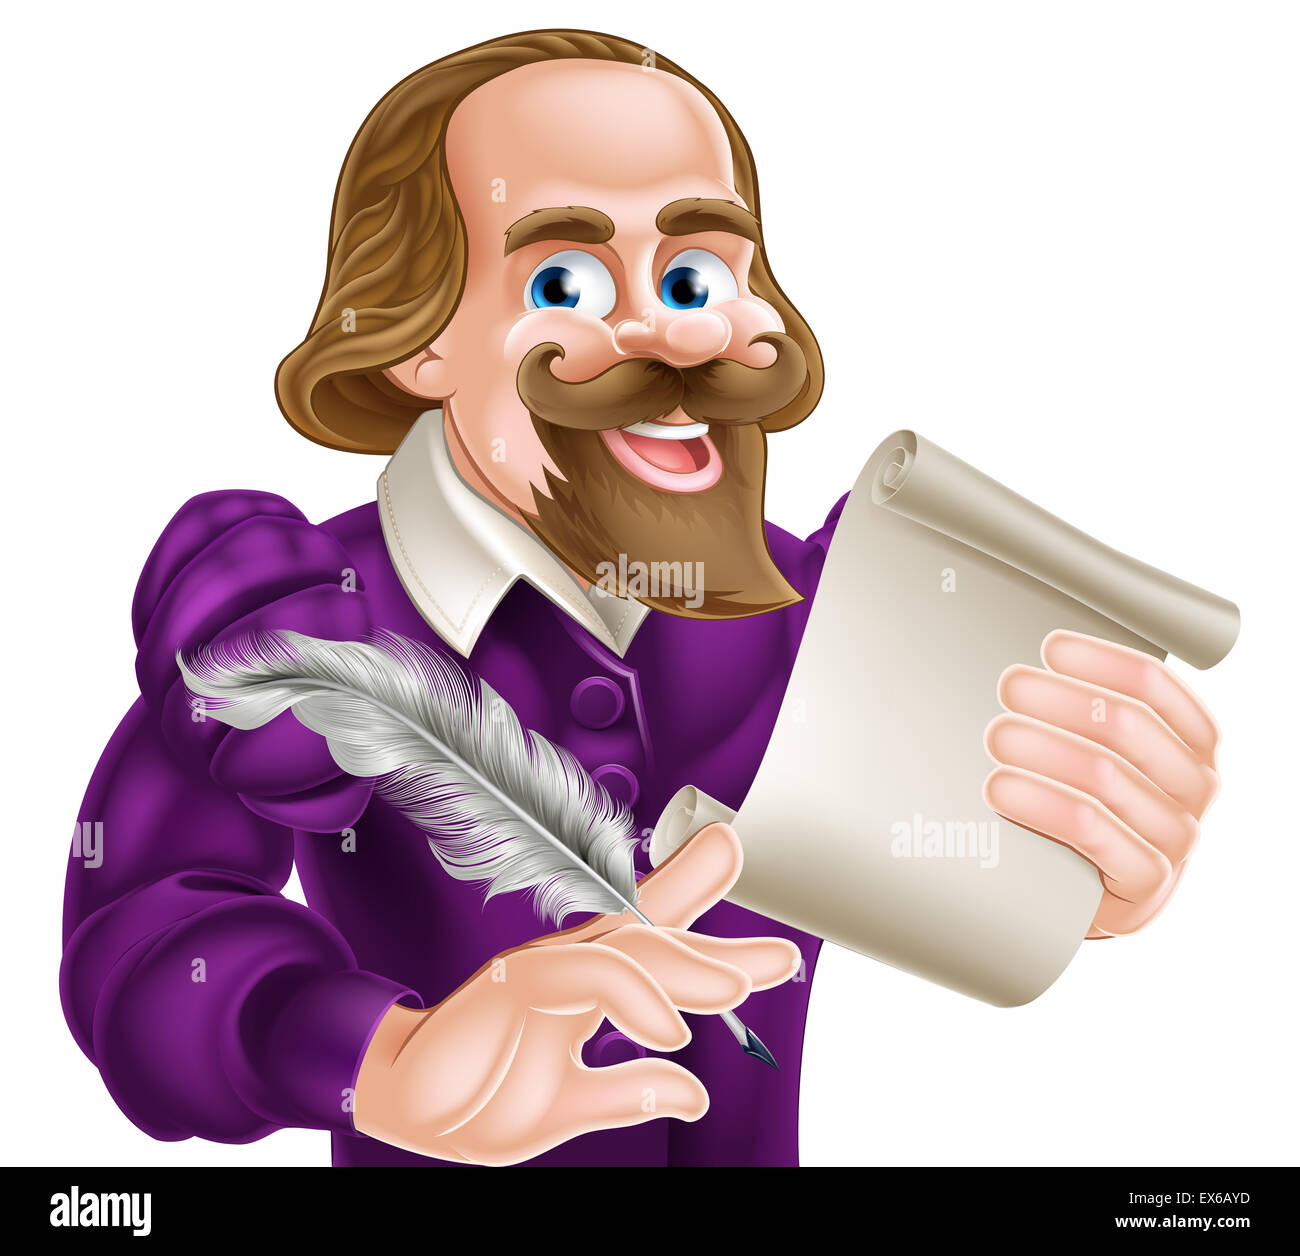 Cartoon of William Shakespeare holding a feather quill and paper scroll Stock Photo